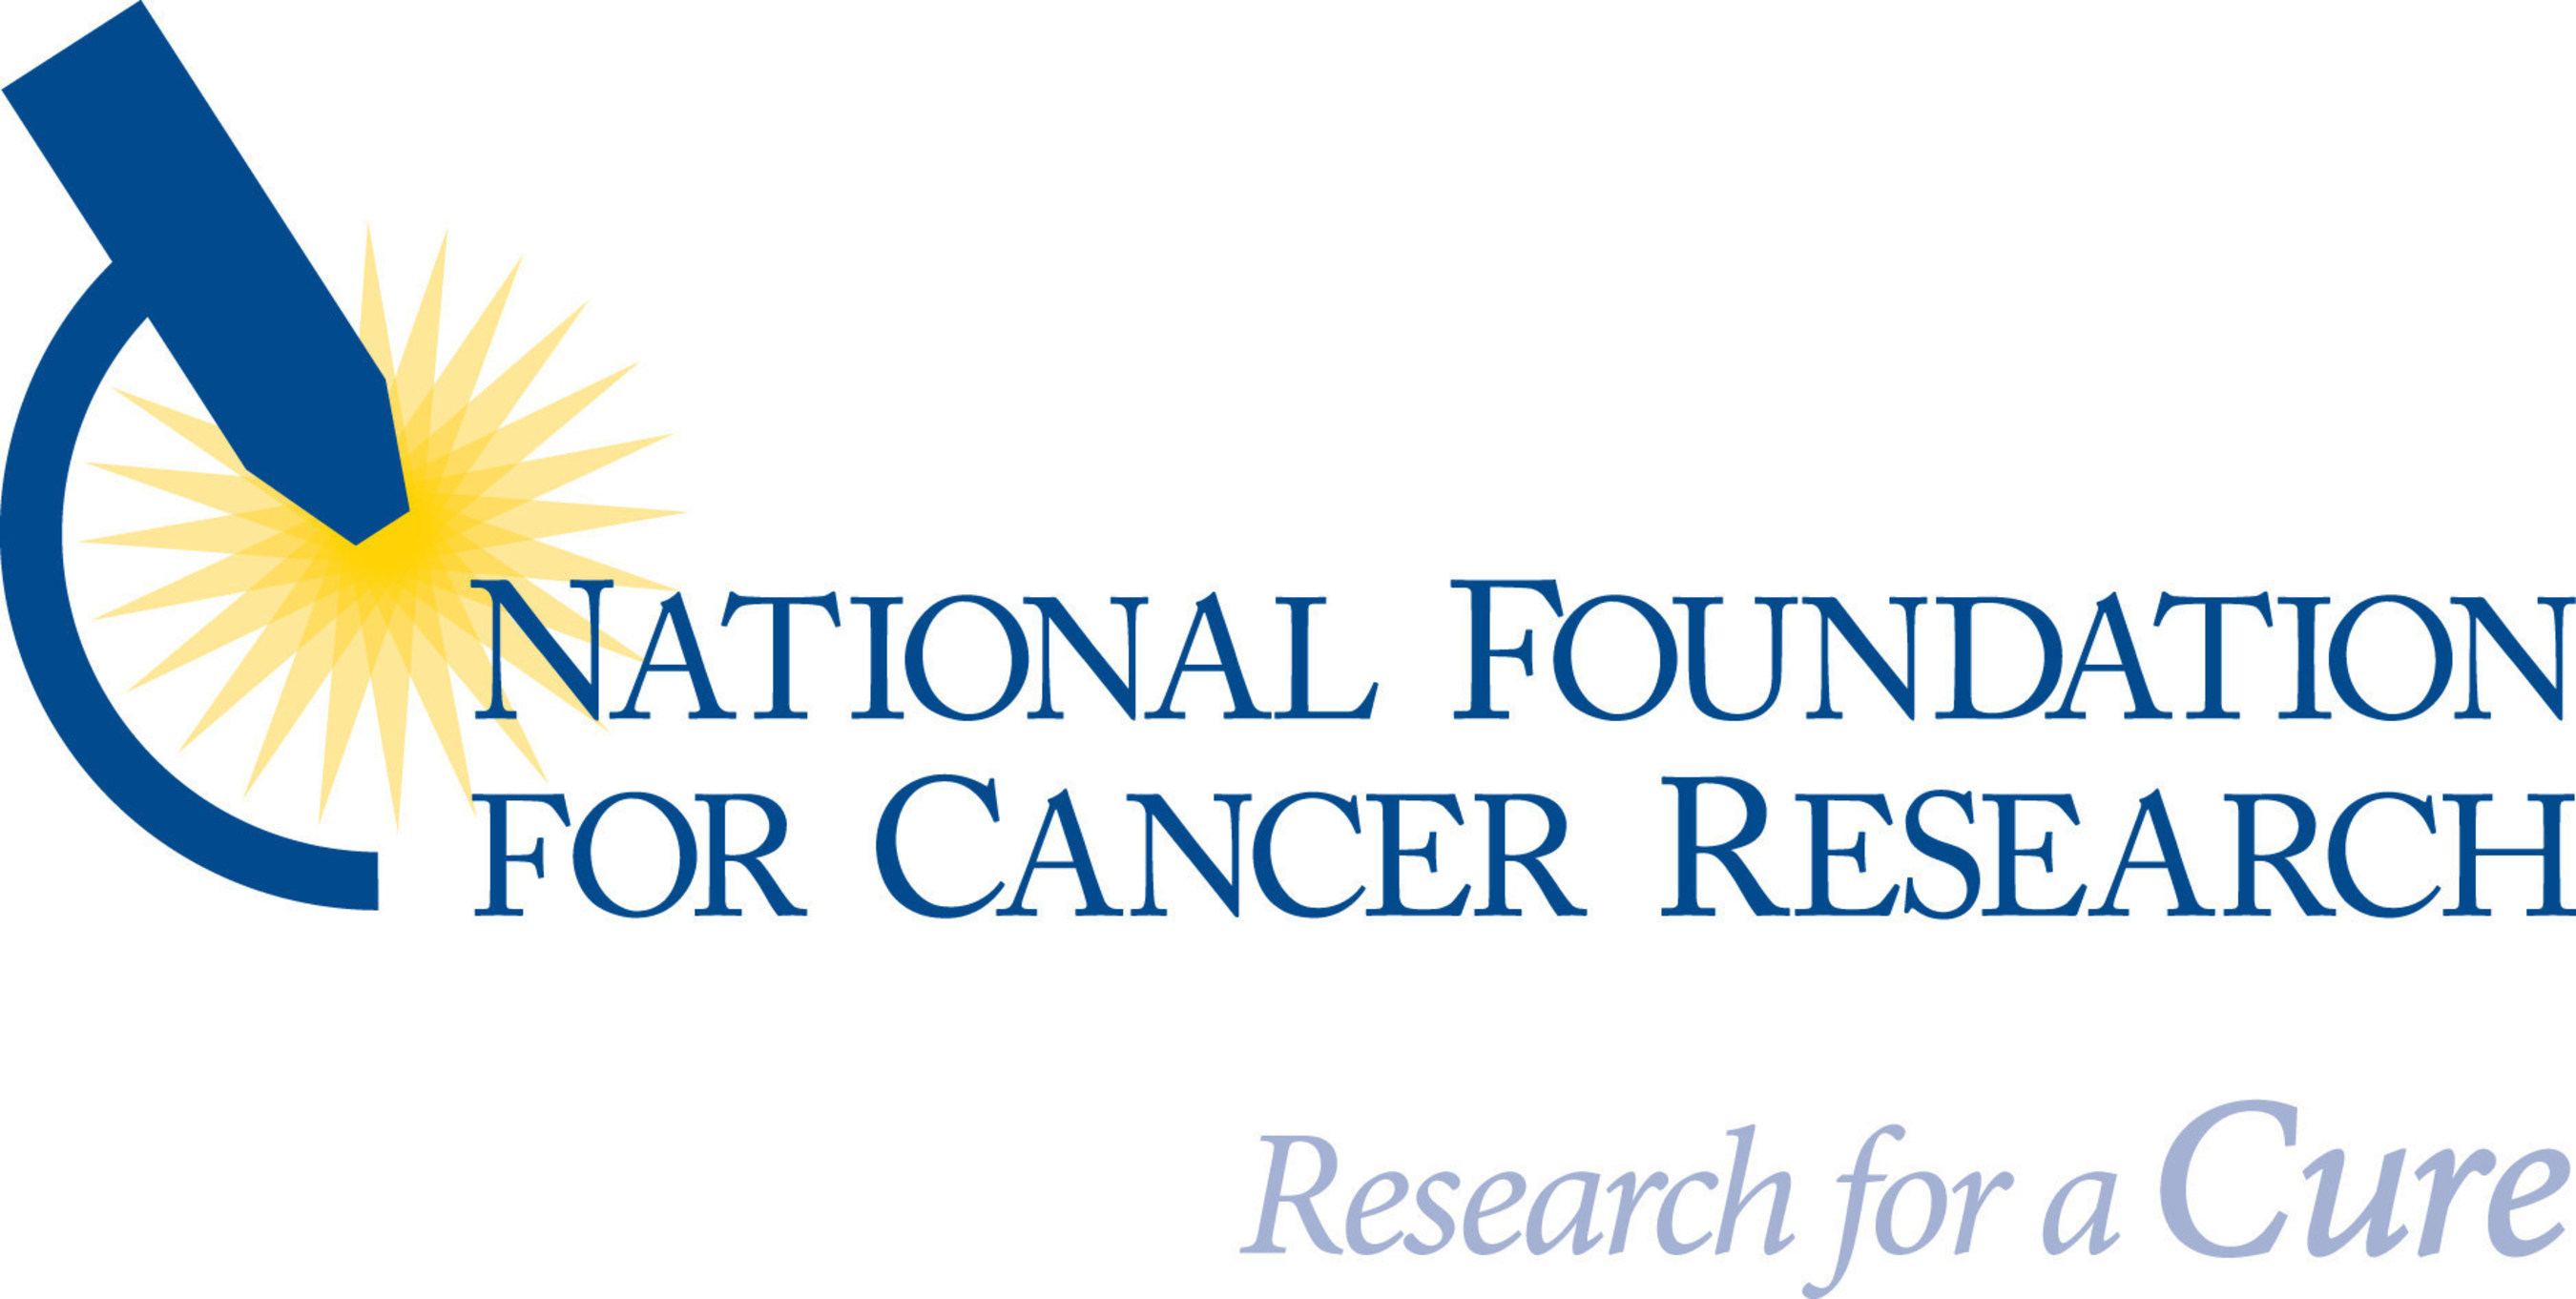 National Foundation for Cancer Research (NFCR)